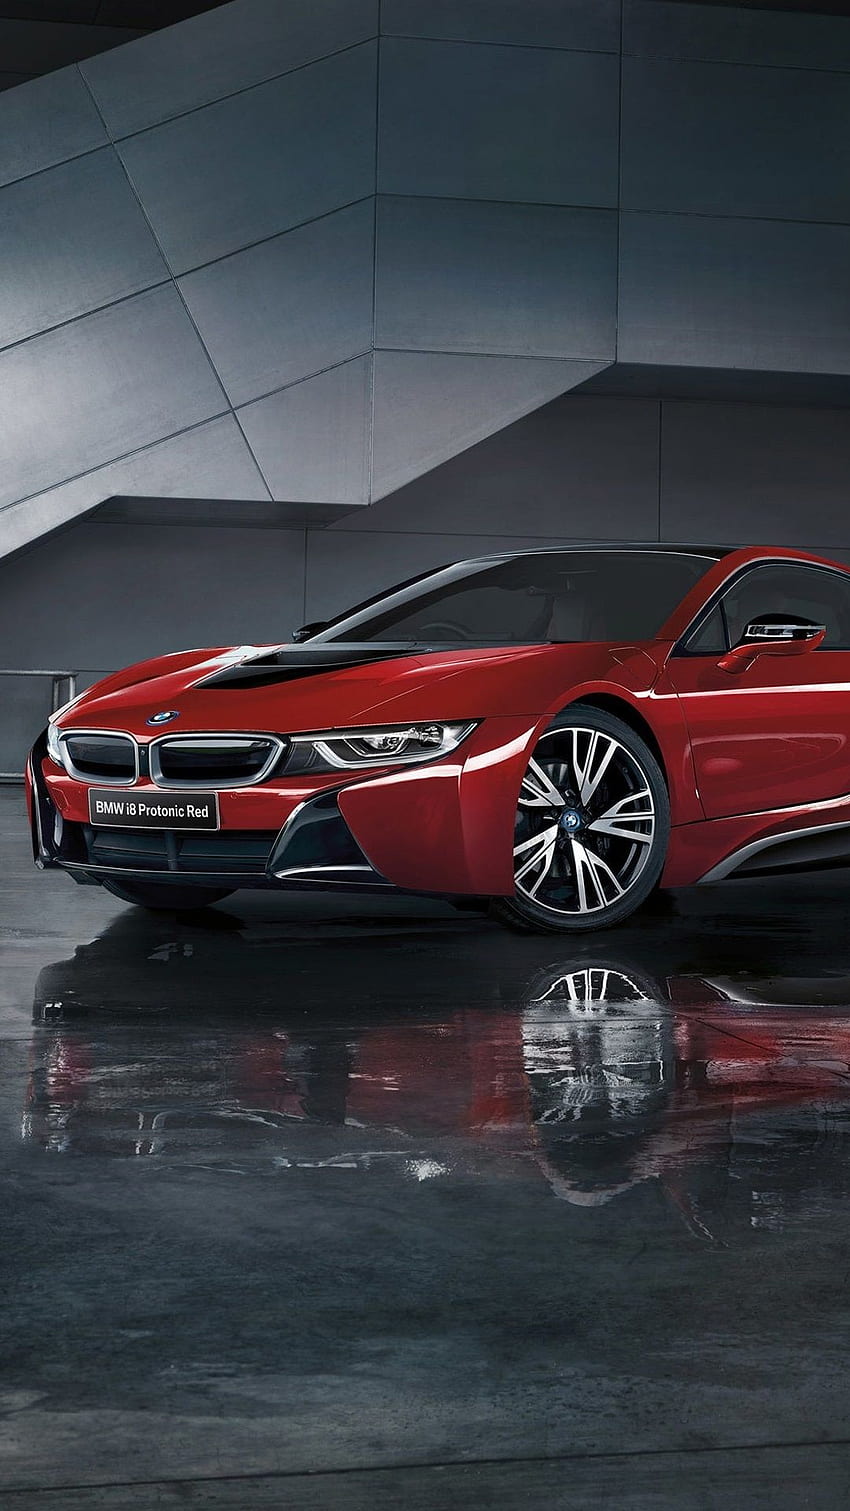 BMW I8 Protonic Red Car IPhone 8 7 6 6S Plus HD phone wallpaper